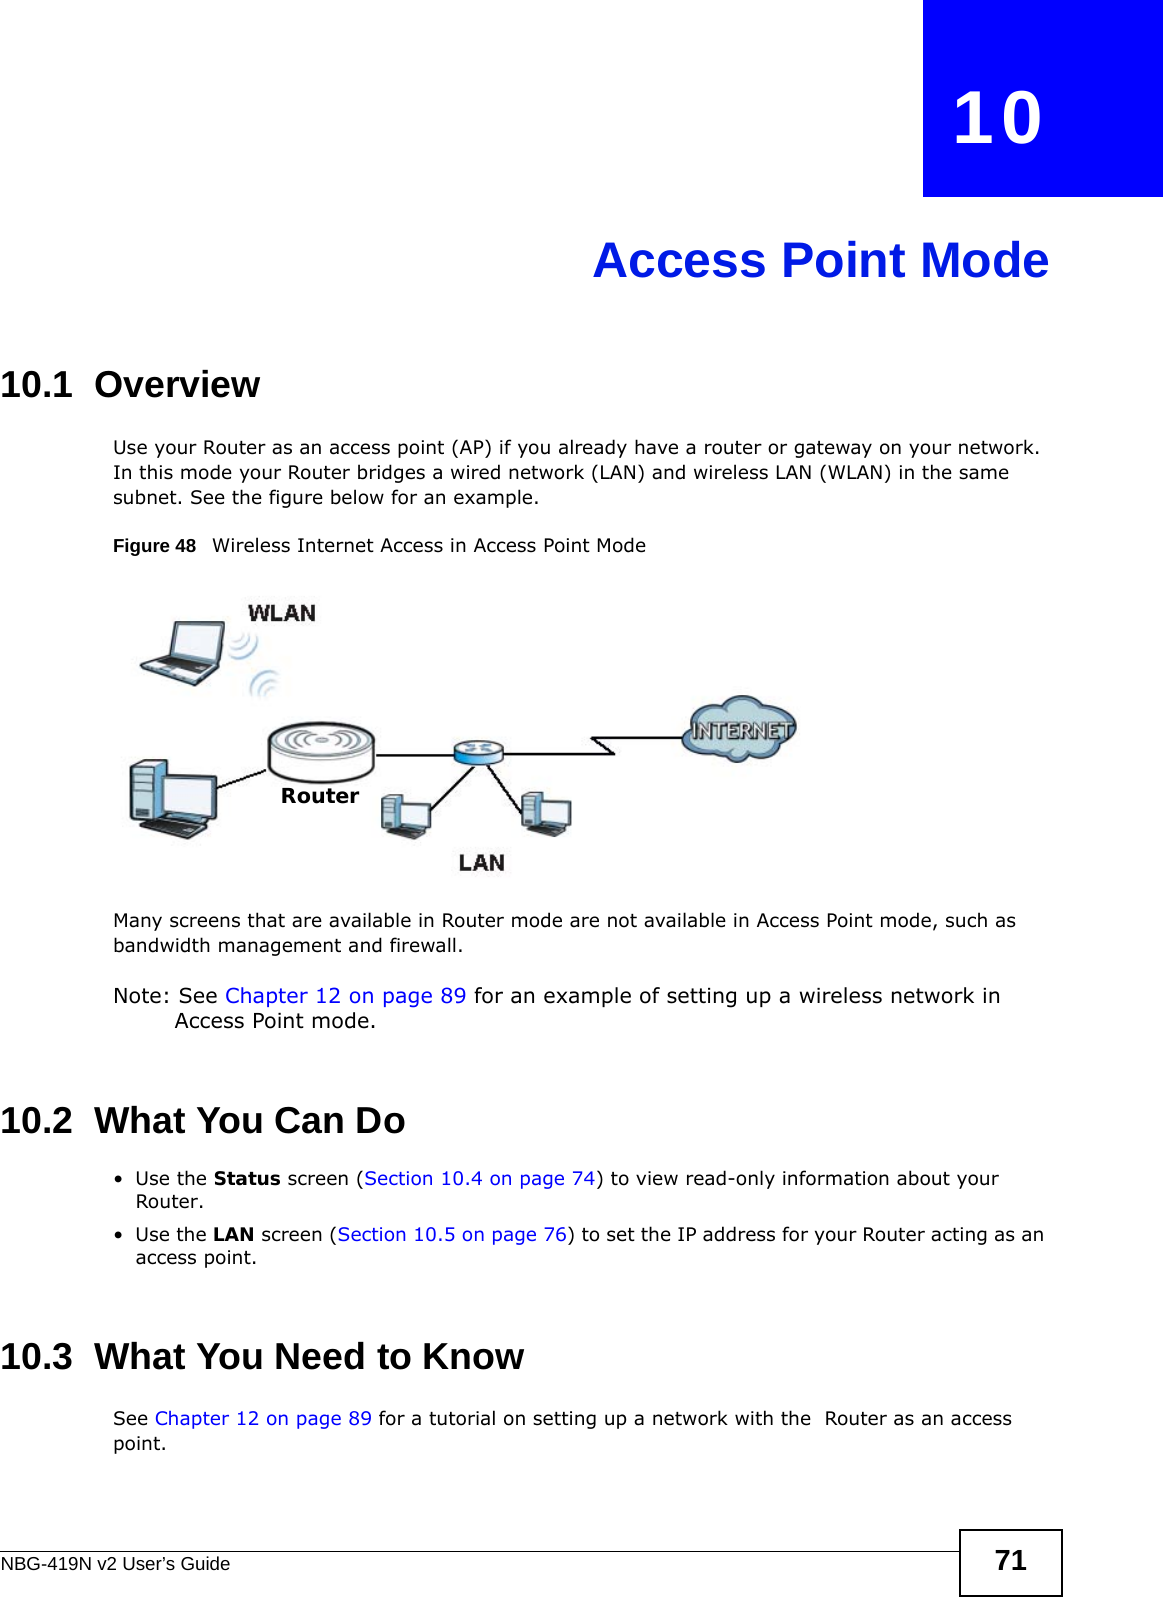 NBG-419N v2 User’s Guide 71CHAPTER   10Access Point Mode10.1  OverviewUse your Router as an access point (AP) if you already have a router or gateway on your network. In this mode your Router bridges a wired network (LAN) and wireless LAN (WLAN) in the same subnet. See the figure below for an example.Figure 48   Wireless Internet Access in Access Point Mode Many screens that are available in Router mode are not available in Access Point mode, such as bandwidth management and firewall.Note: See Chapter 12 on page 89 for an example of setting up a wireless network in Access Point mode. 10.2  What You Can Do•Use the Status screen (Section 10.4 on page 74) to view read-only information about your Router.•Use the LAN screen (Section 10.5 on page 76) to set the IP address for your Router acting as an access point.10.3  What You Need to KnowSee Chapter 12 on page 89 for a tutorial on setting up a network with the  Router as an access point.Router